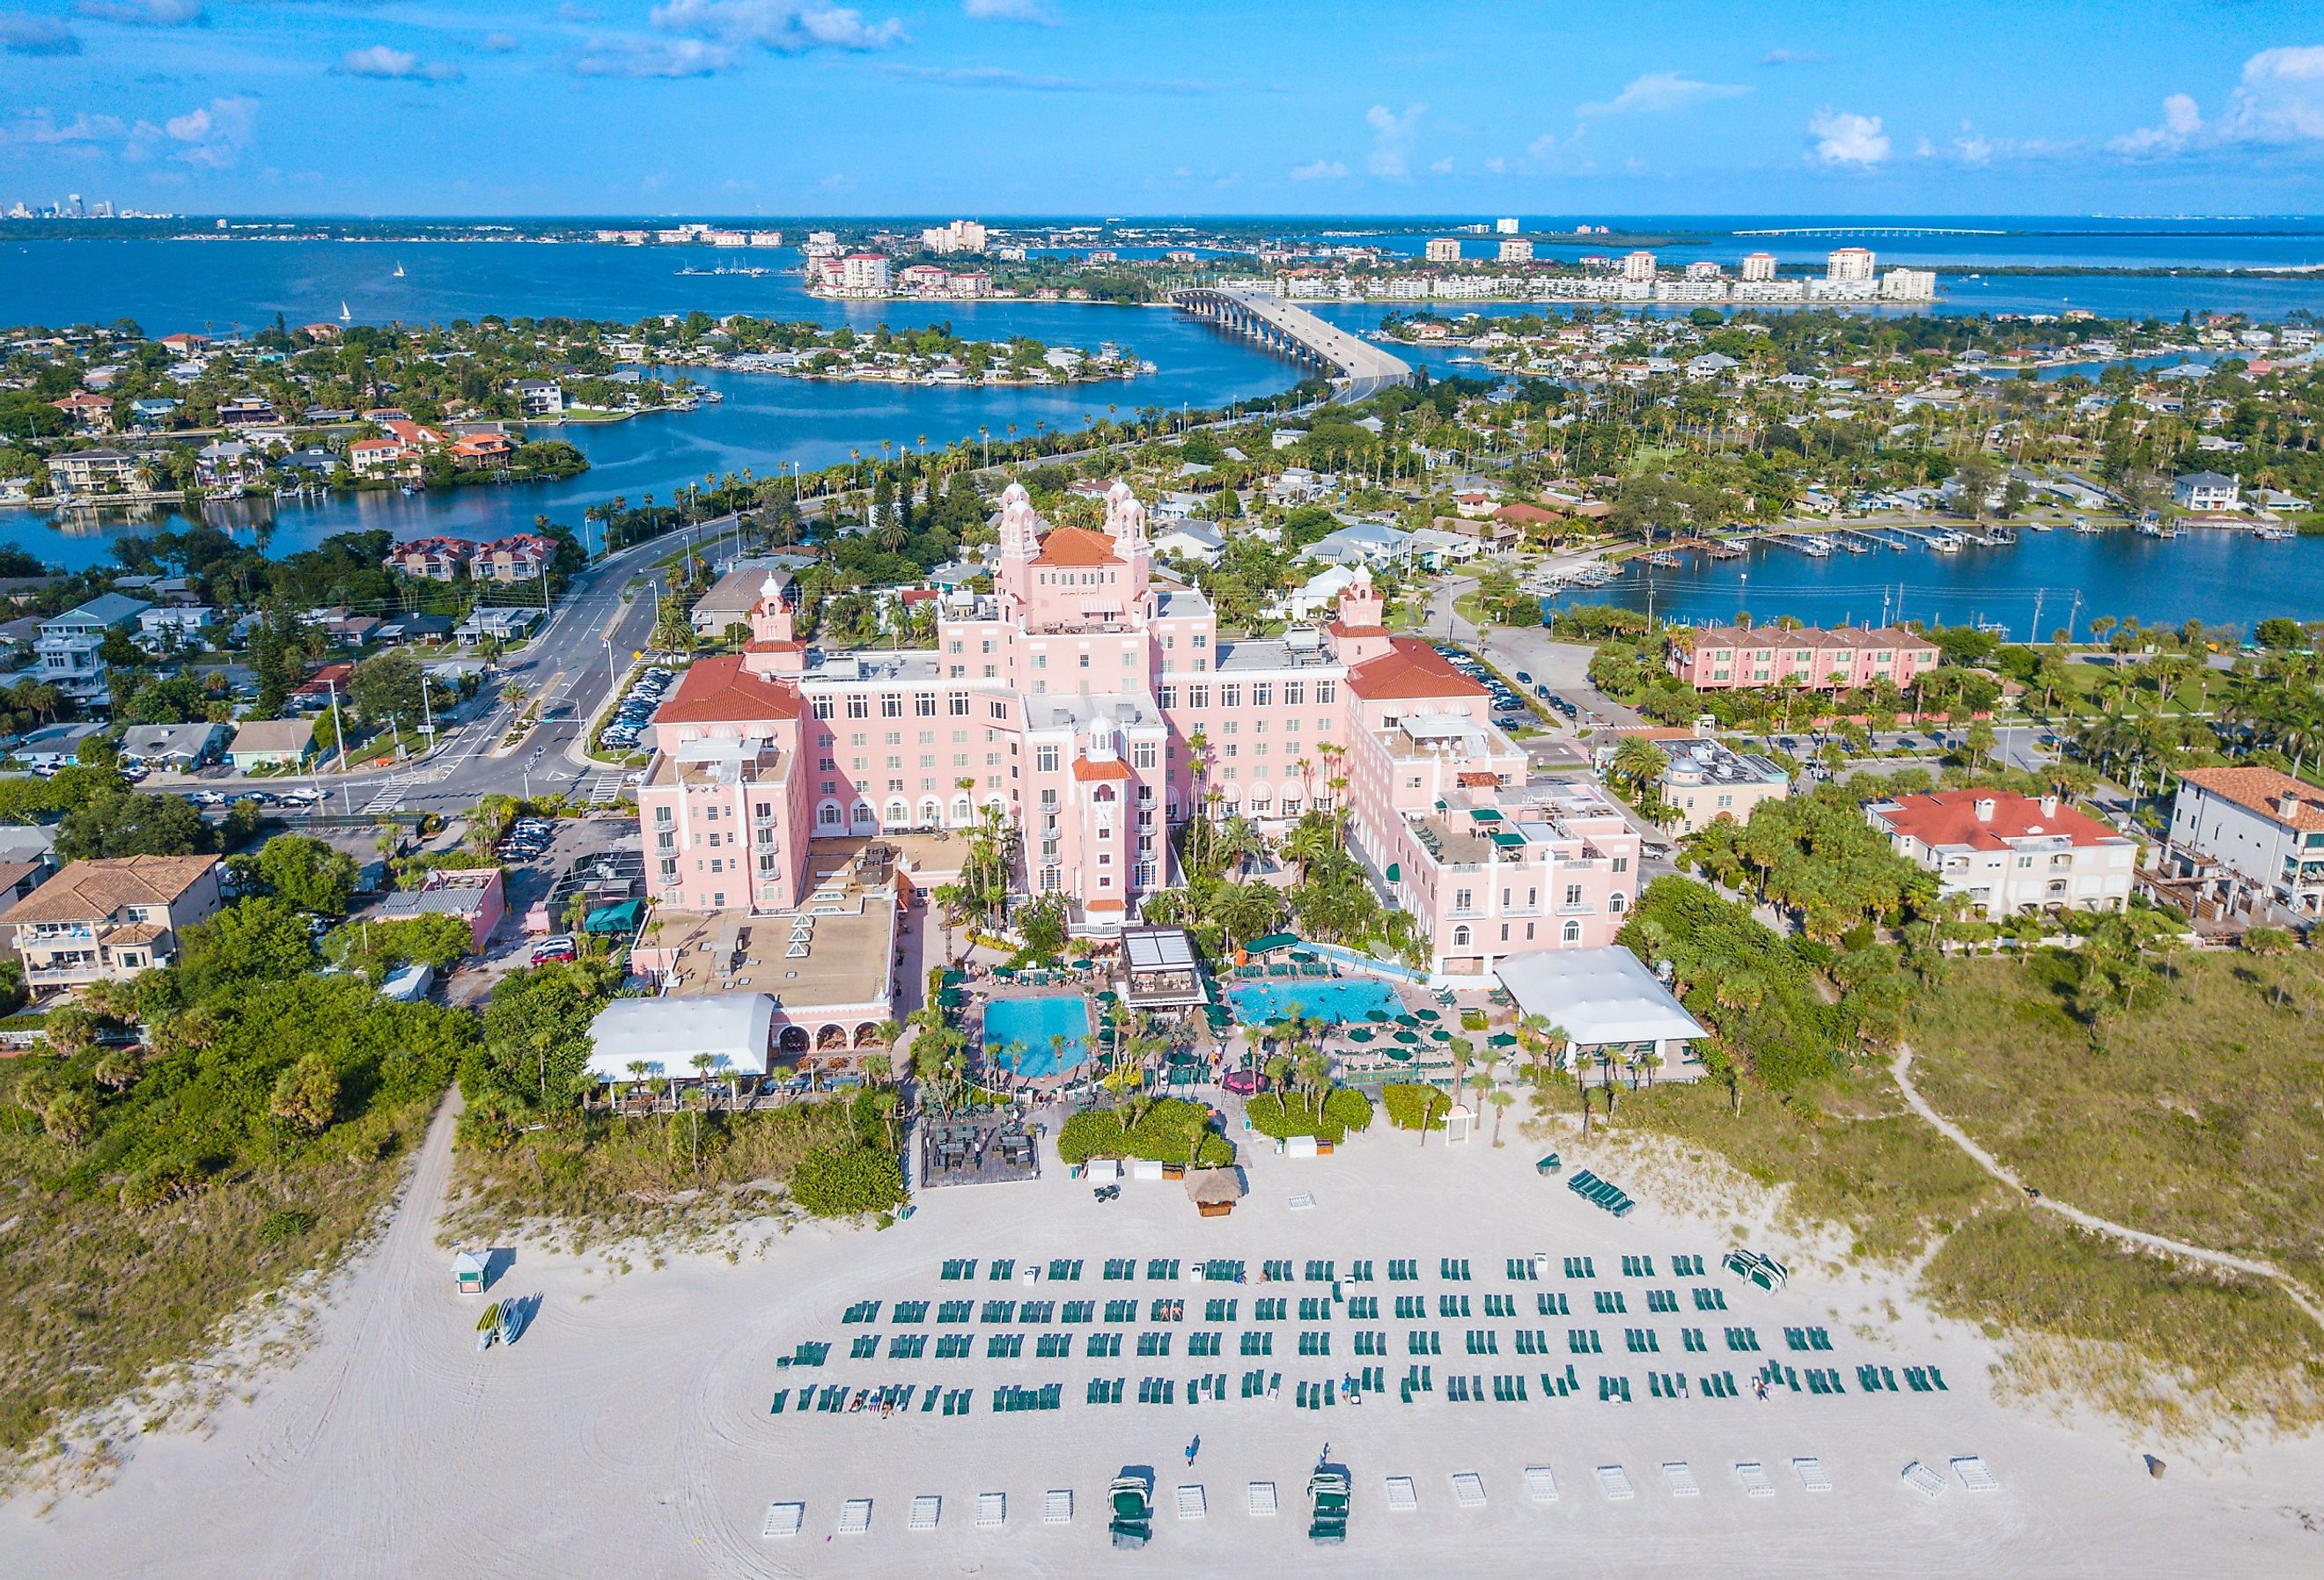 Aerial view of St Petersburg, Florida. Resorts and gulf in the background. Image credit Artiom Photo via Shutterstock.